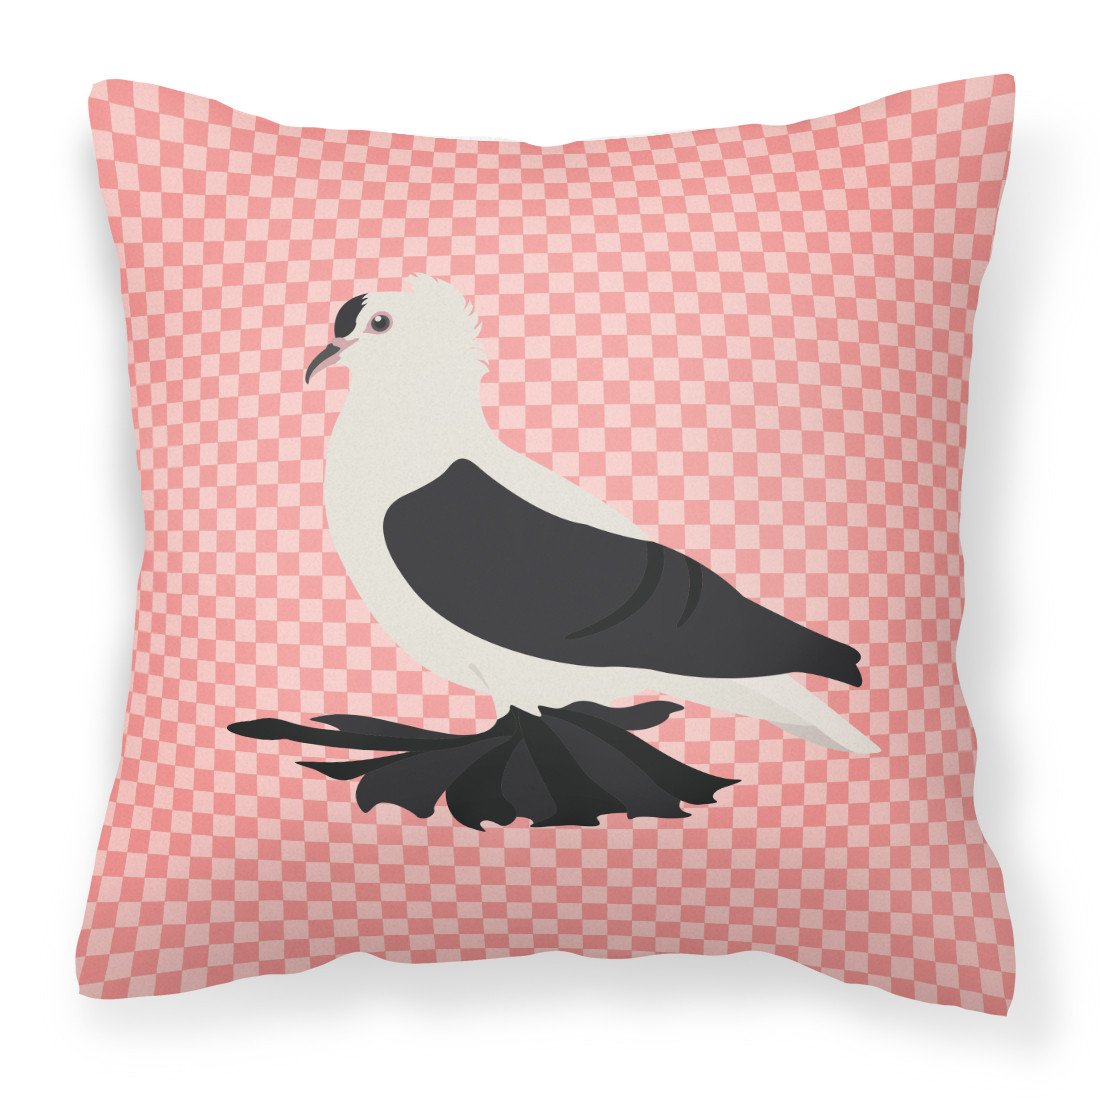 Saxon Fairy Swallow Pigeon Pink Check Fabric Decorative Pillow BB7946PW1818 by Caroline's Treasures